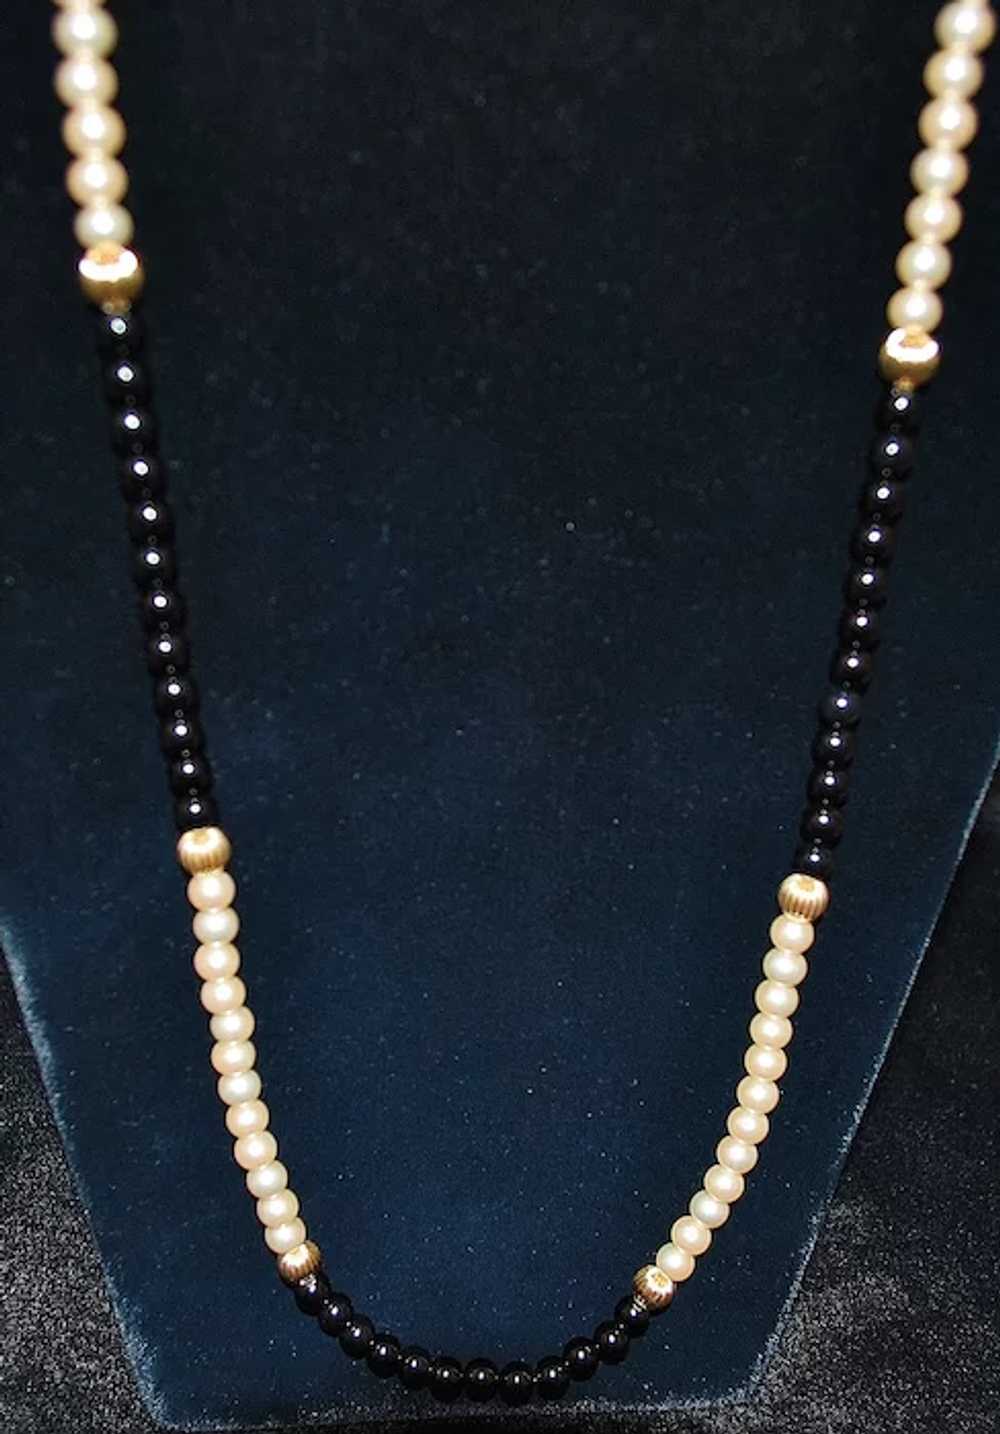 14K Gold, Cultured Pearl and Black Onyx Necklace - image 5